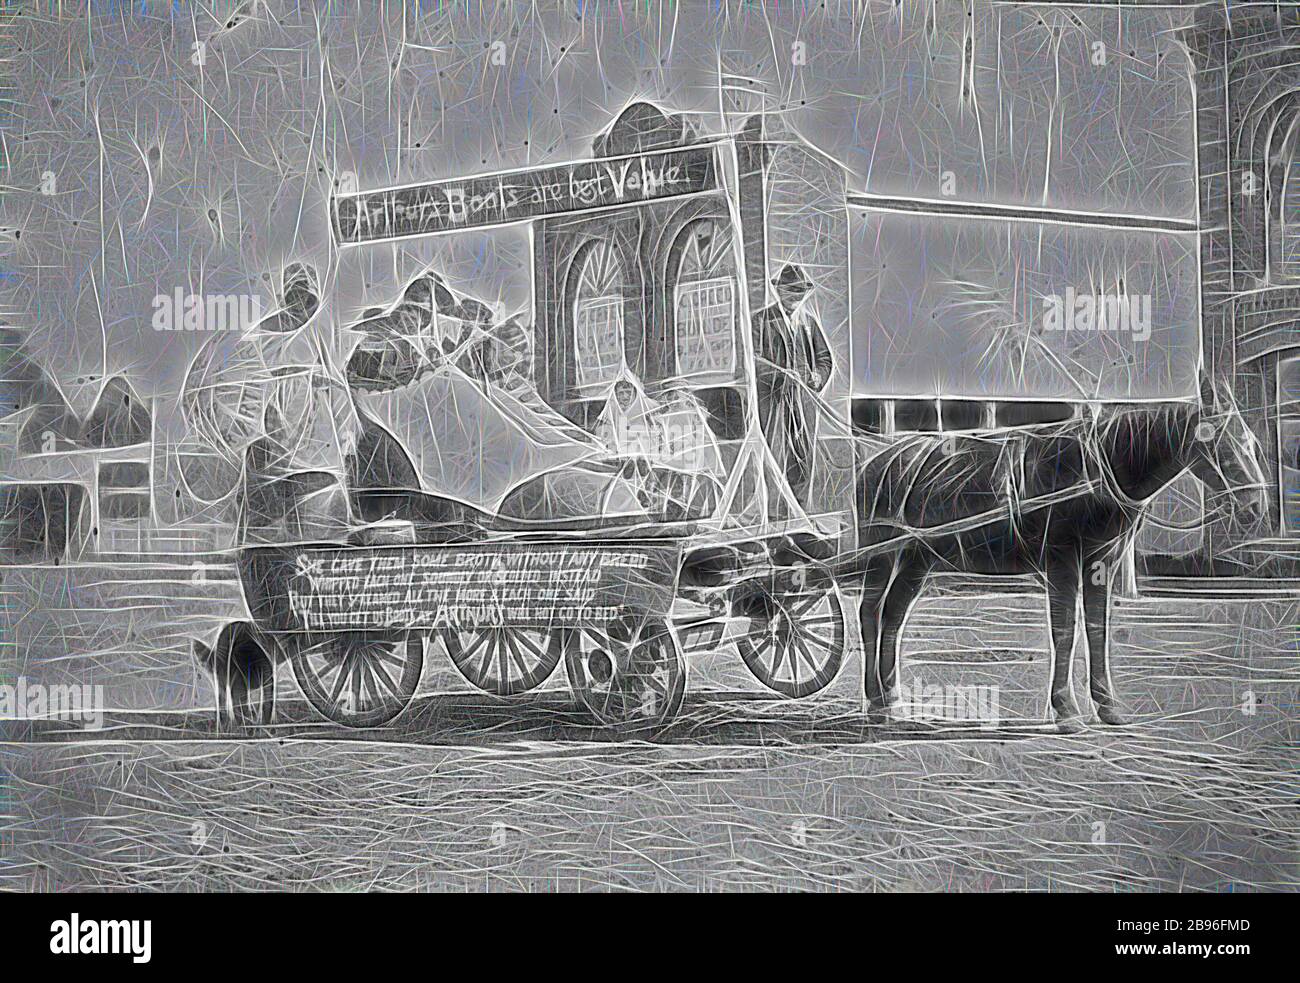 Negative - Bairnsdale, Victoria, circa 1900, A horse float in a carnival procession. The theme of the float is 'The old woman who lived in a shoe' and a sign on the side reads: She gave them some broth without any bread/ whipped each one soundly or scolded instead/ but they yelled all the more and each one said/ 'till you get us boots at Arthur's we'll not go to bed. A sign above the float reads: Arthur's boots are best value.'., Reimagined by Gibon, design of warm cheerful glowing of brightness and light rays radiance. Classic art reinvented with a modern twist. Photography inspired by futuri Stock Photo